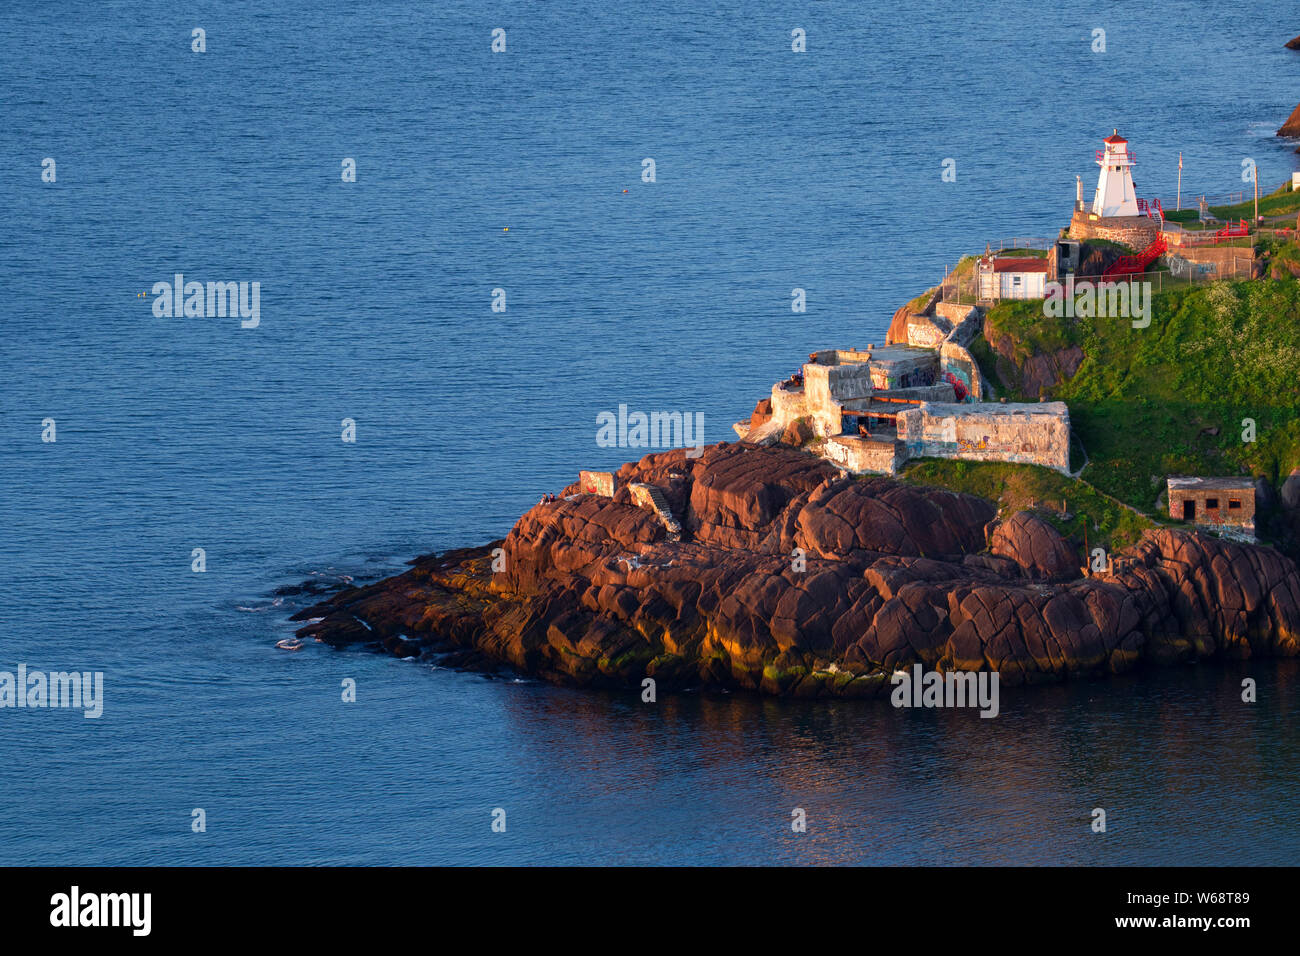 Fort Amherst Lighthouse view, Signal Hill National Historic Site, St John's, Newfoundland and Labrador, Canada Stock Photo